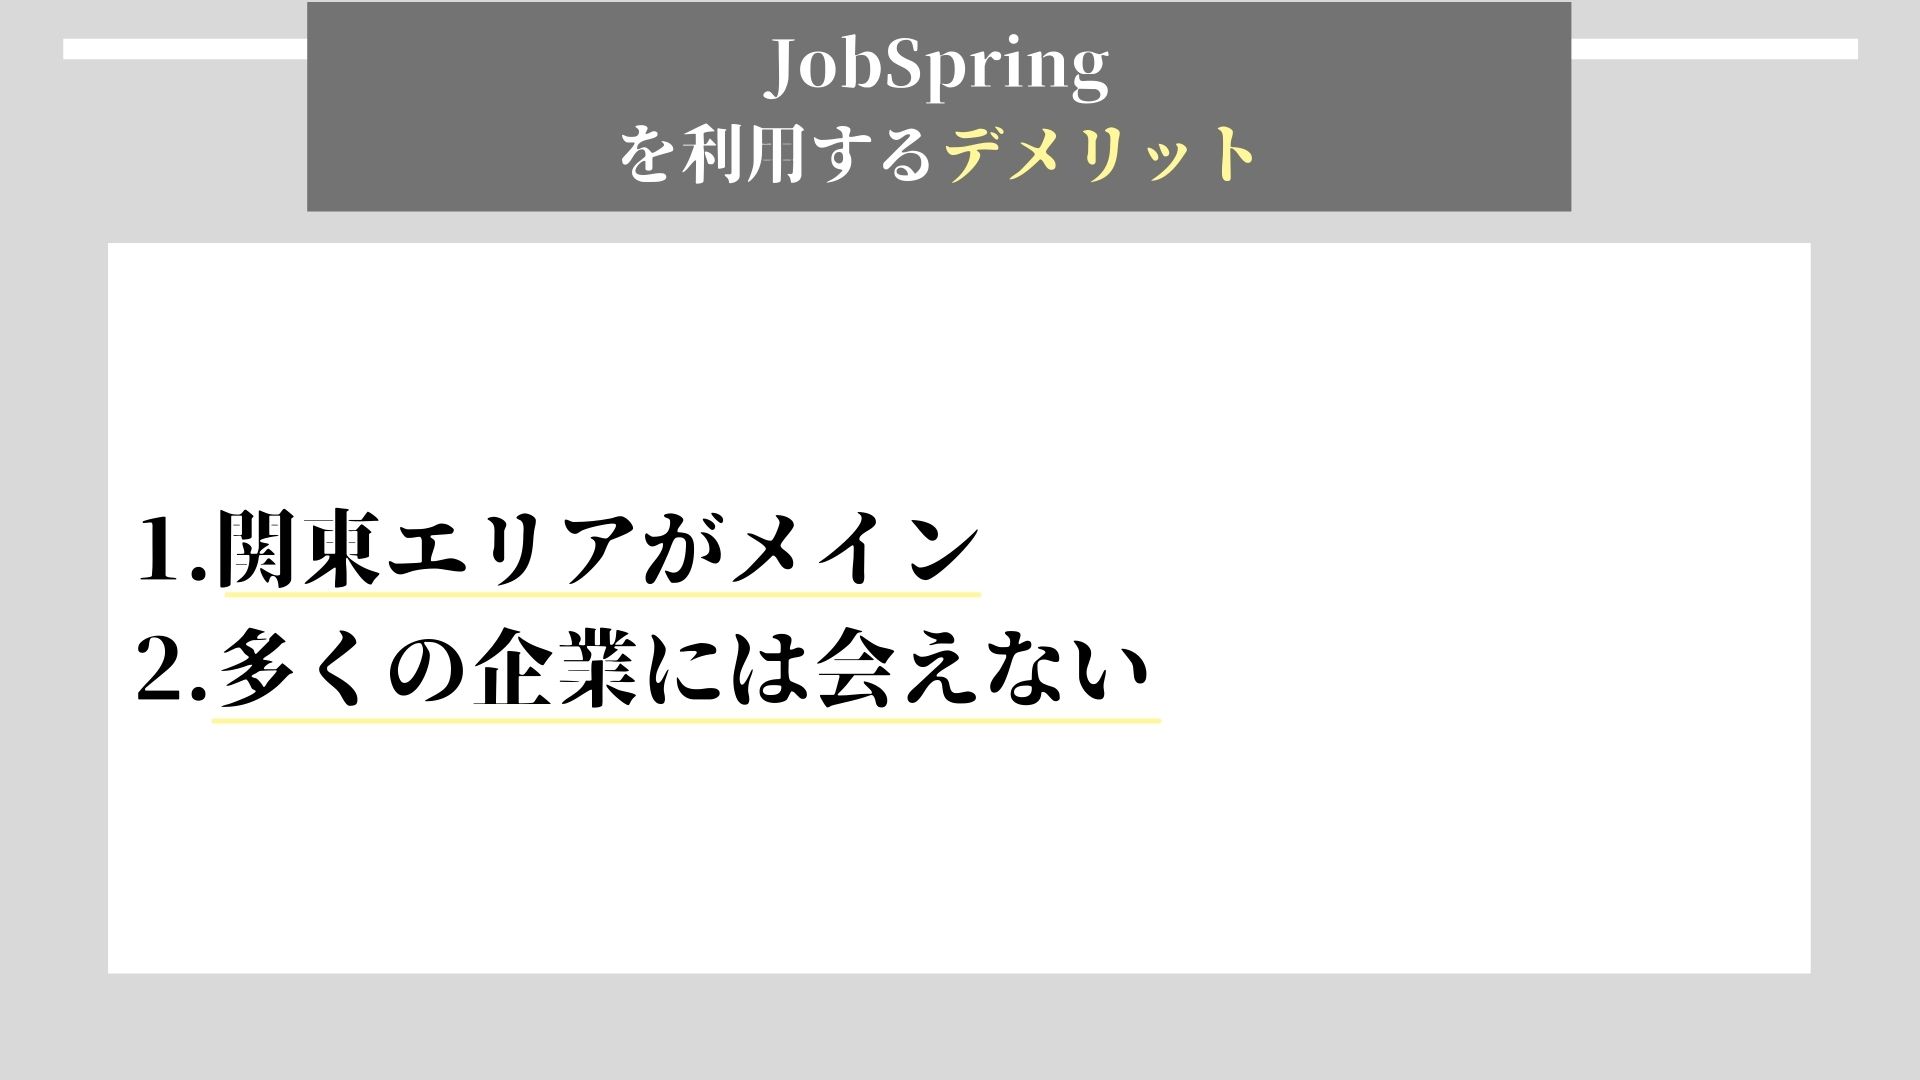 JobSpring デメリット